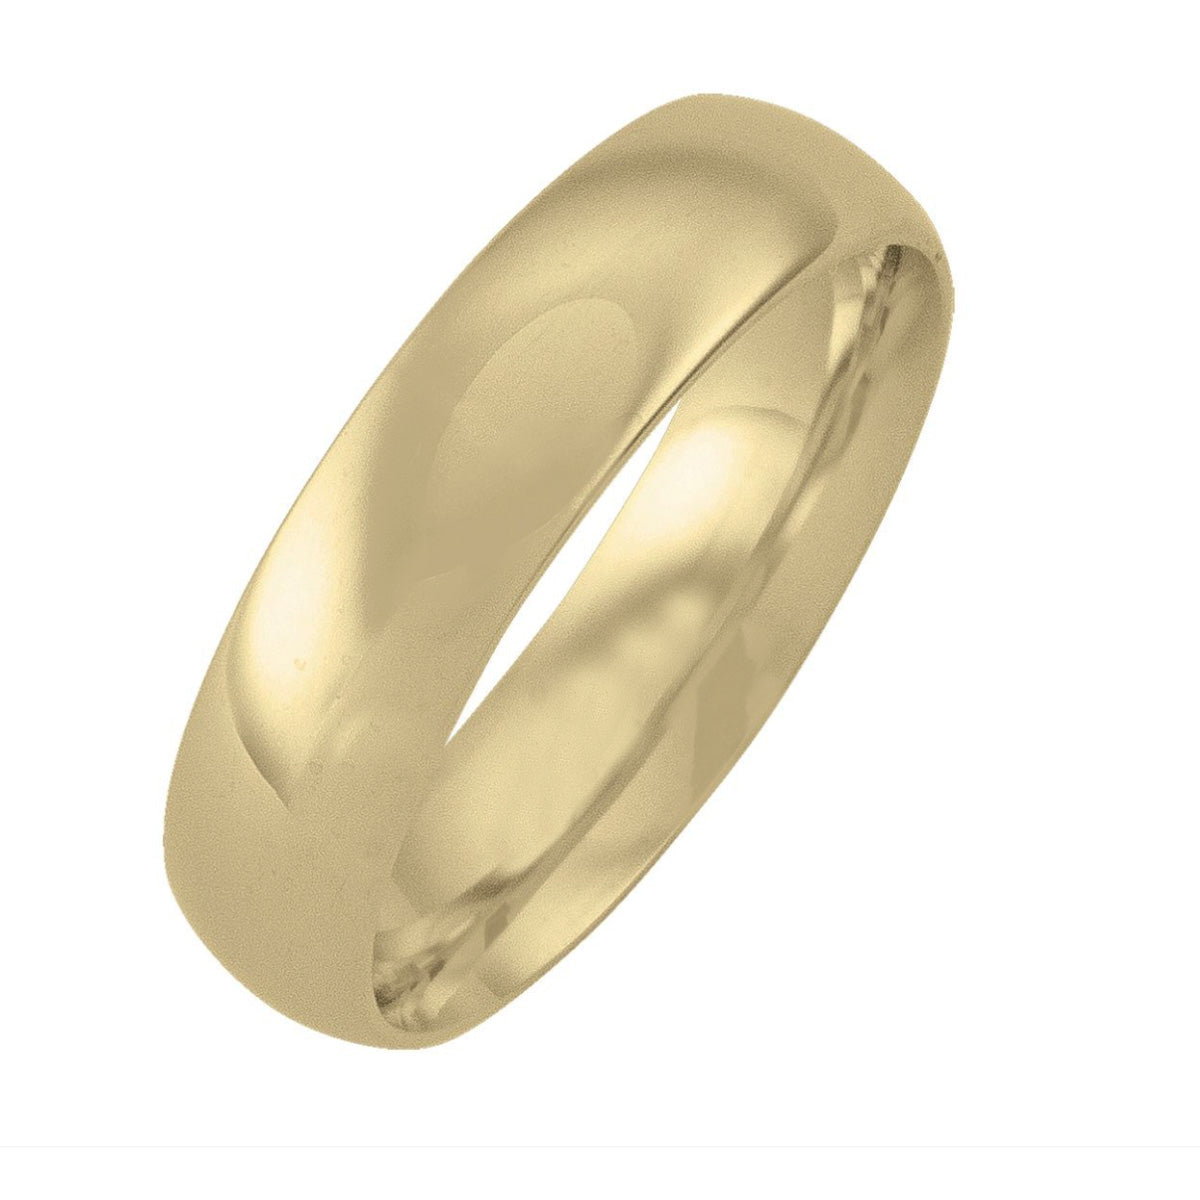 WB0105A, Gold Wedding Band, 5 mm, Domed Top, Inside Comfort Fit